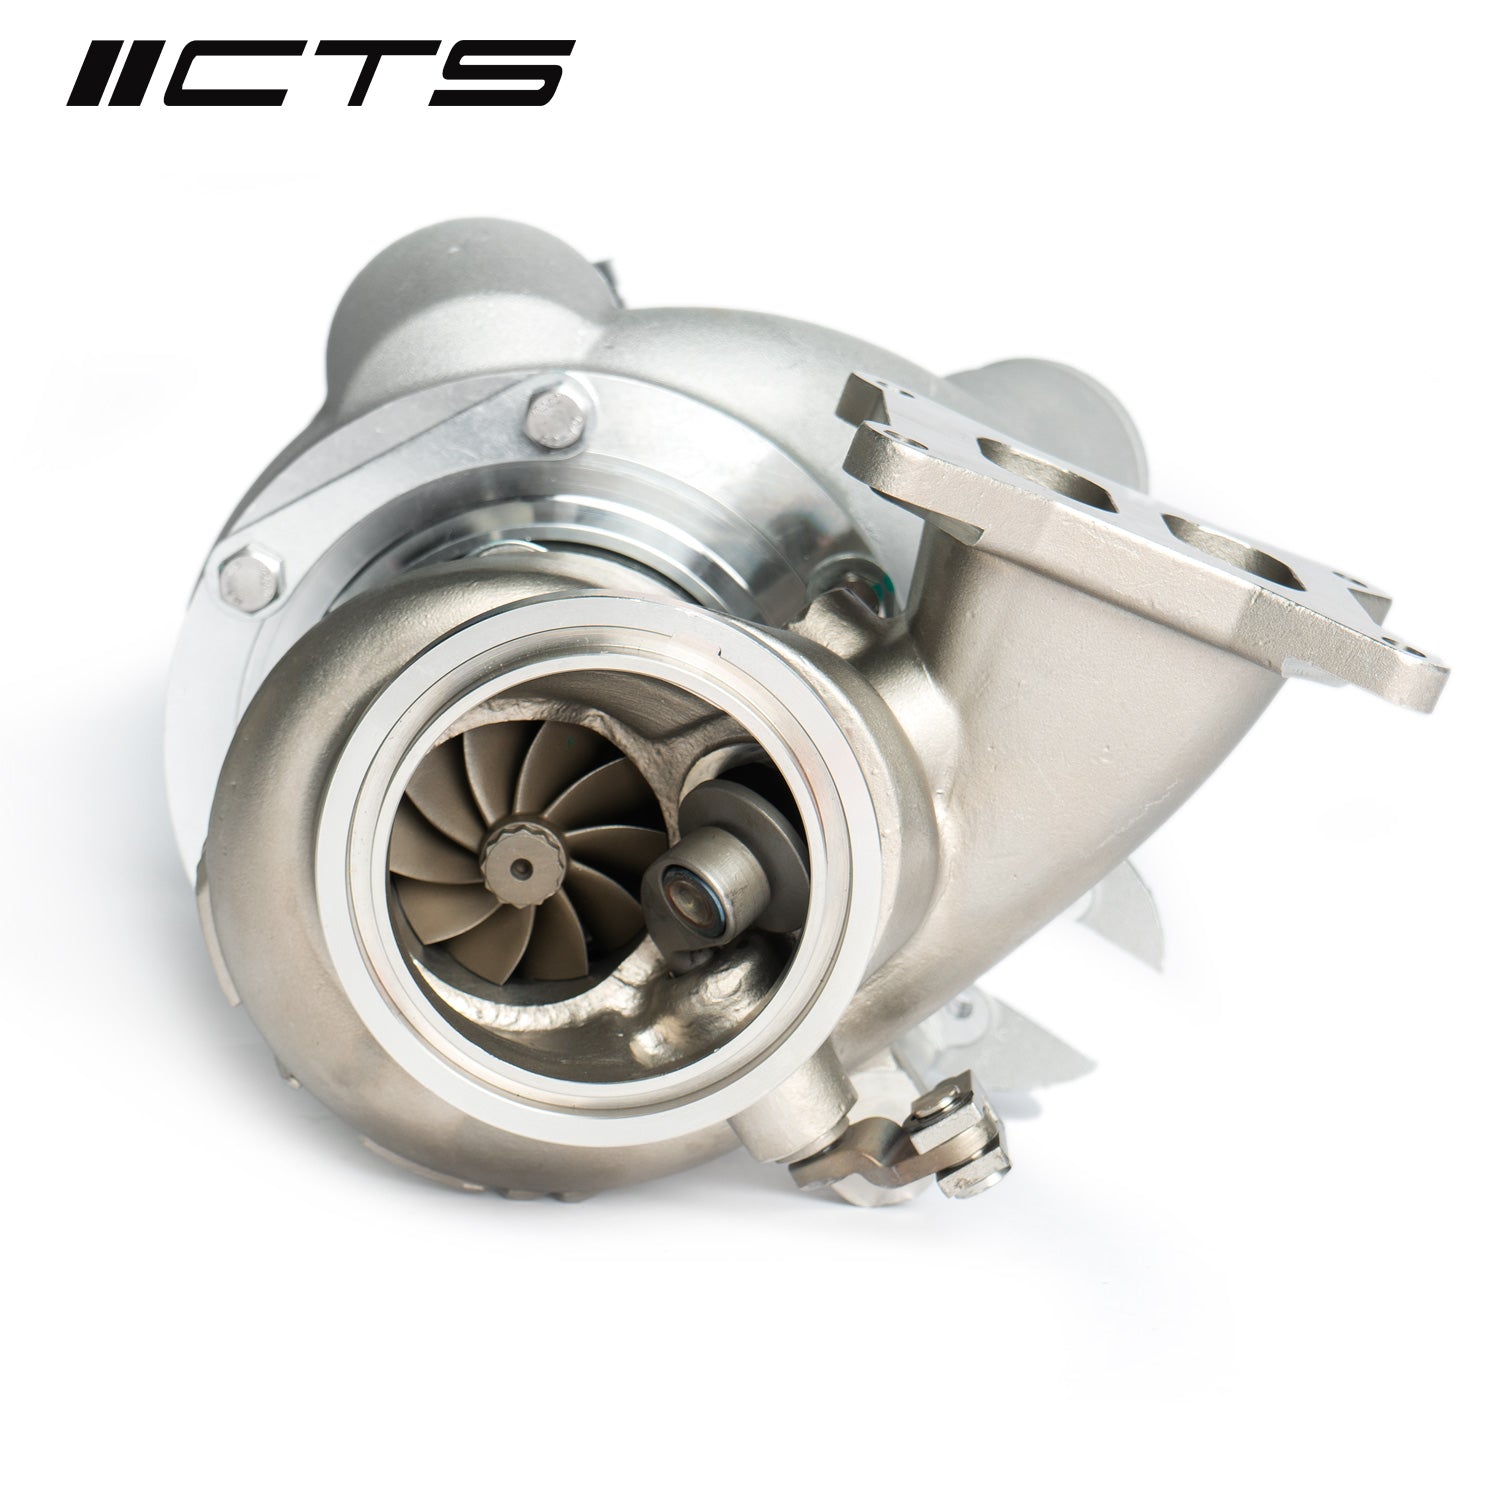 CTS TURBO BOSS700 V3 FOR MQB VW GTI/GOLF R AND AUDI A3/S3 - 0